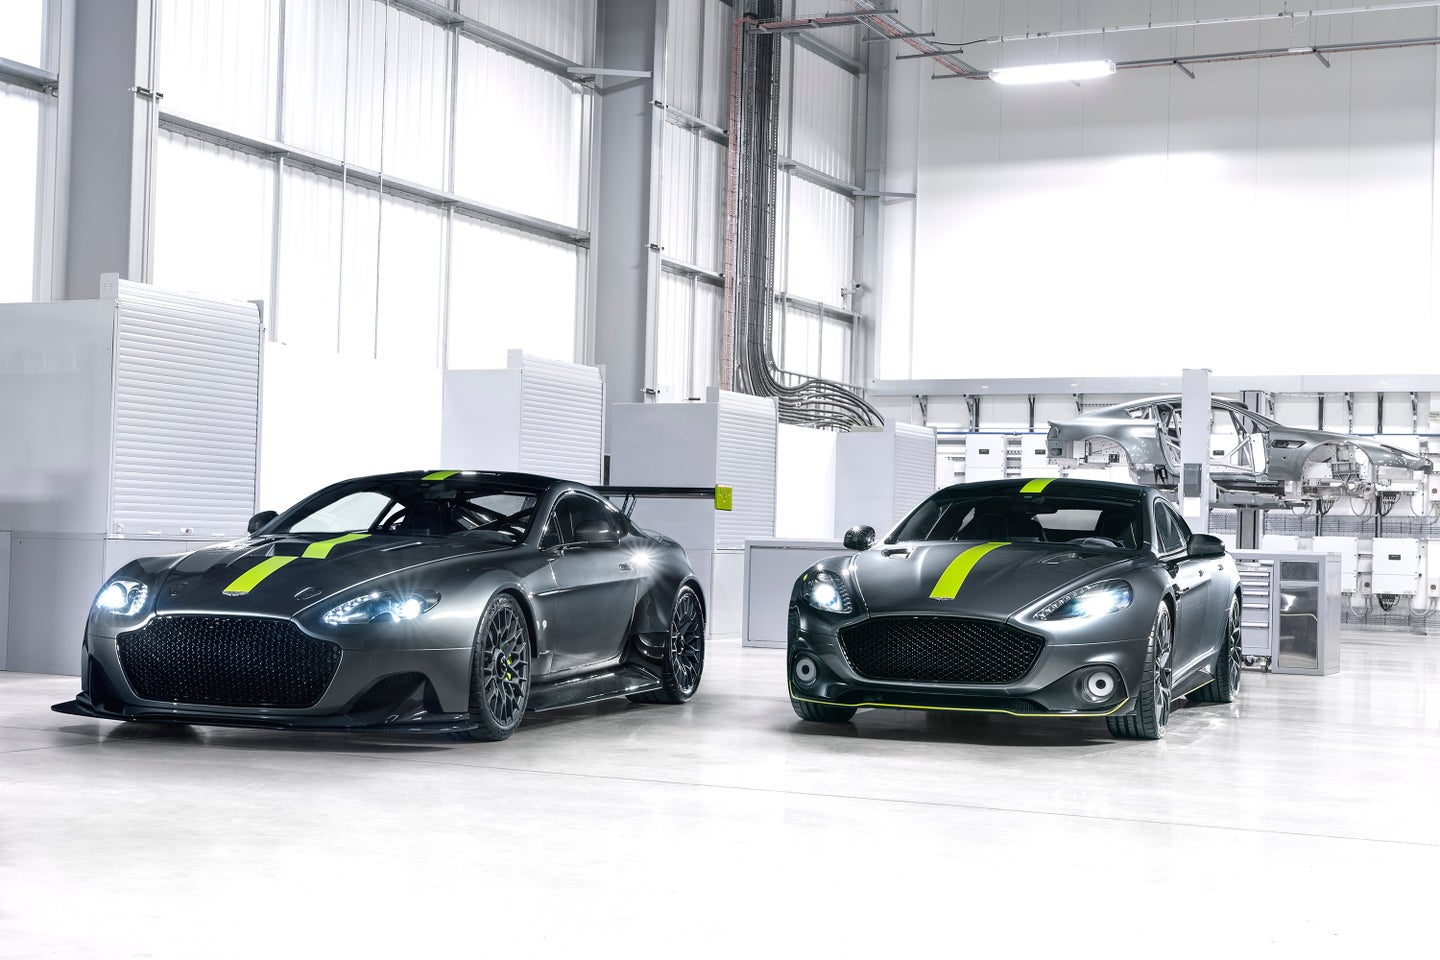 Aston Martin’s New in-House Tuner Brand Challenges BMW M and Mercedes-AMG